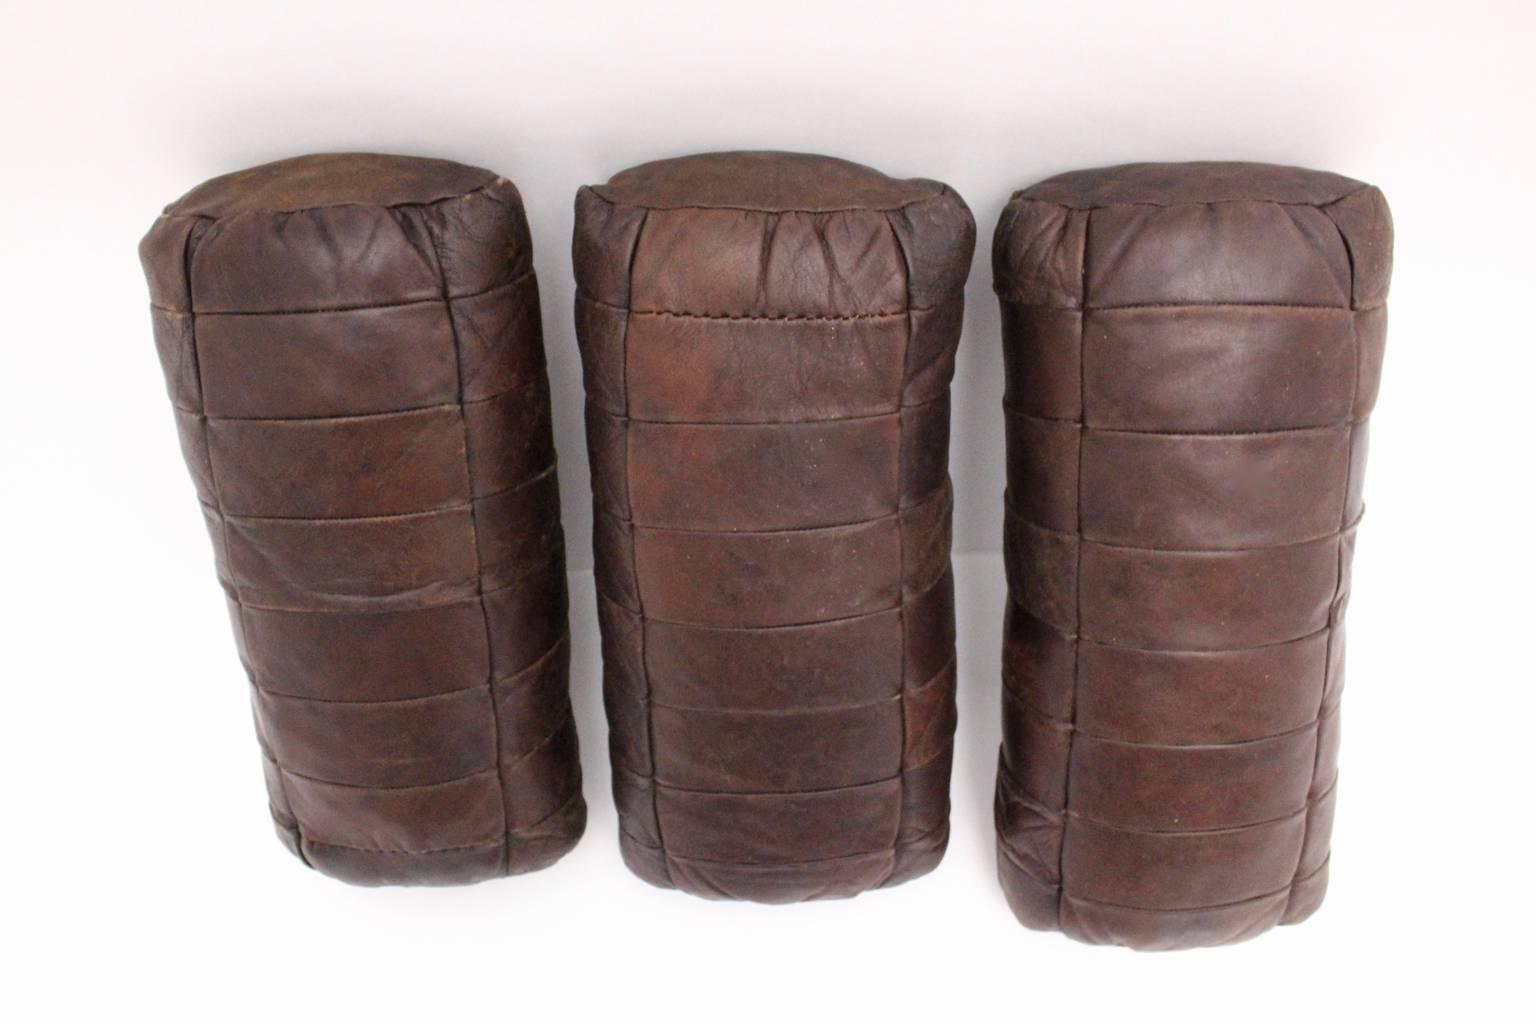 This set of three patch worked pillows by De Sede 1970s, were made of brown leather and has a great patina.
The pillows are carefully cleaned and the condition is very good.

Measures:
Width 50 cm
Depth 23 cm
Height 14 cm.